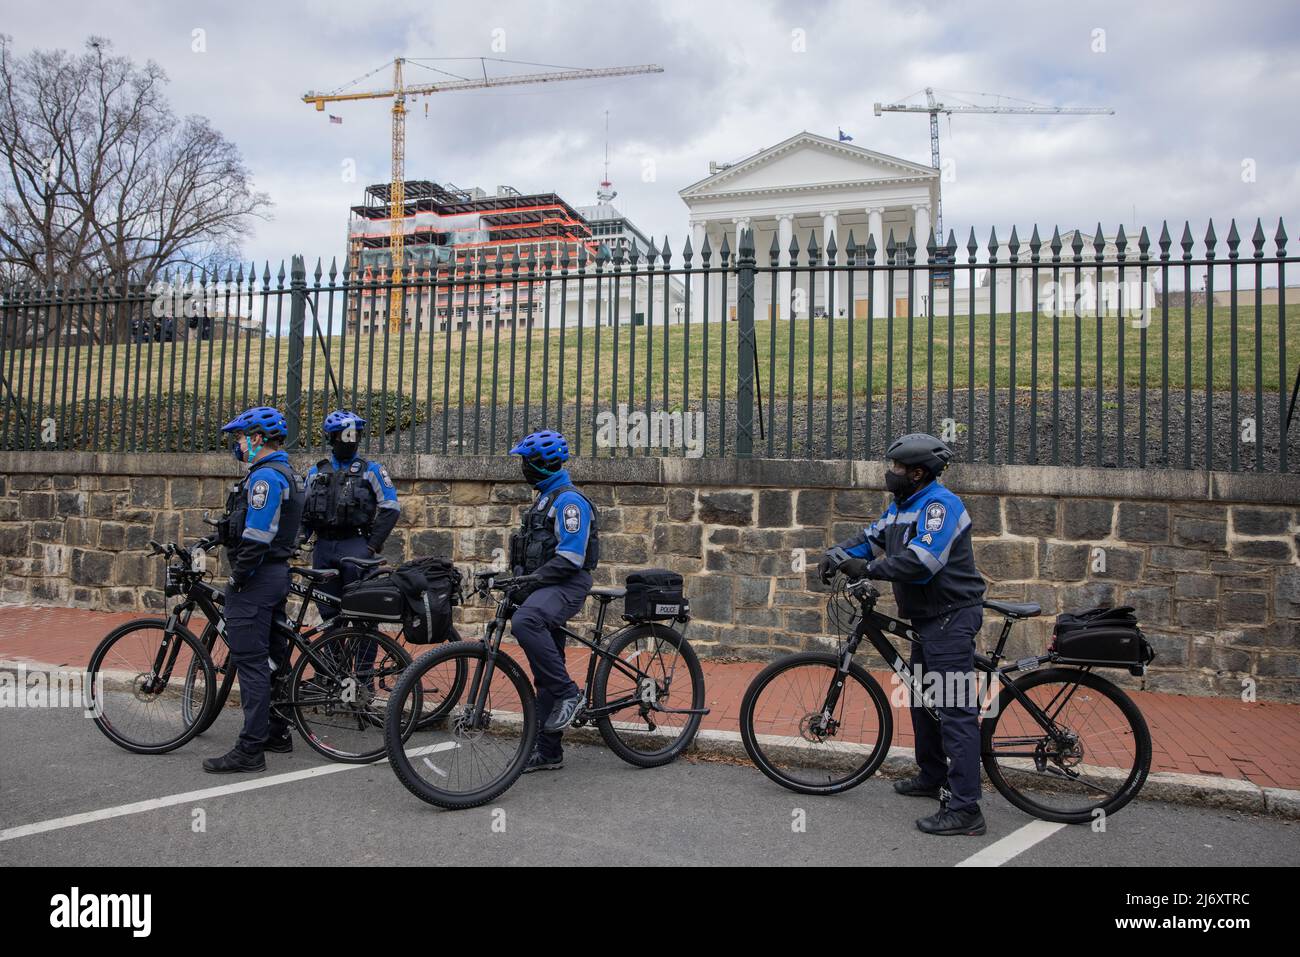 RICHMOND, VA – January 18, 2021: Police officers are seen during a demonstration near Capitol Square in Richmond. Stock Photo